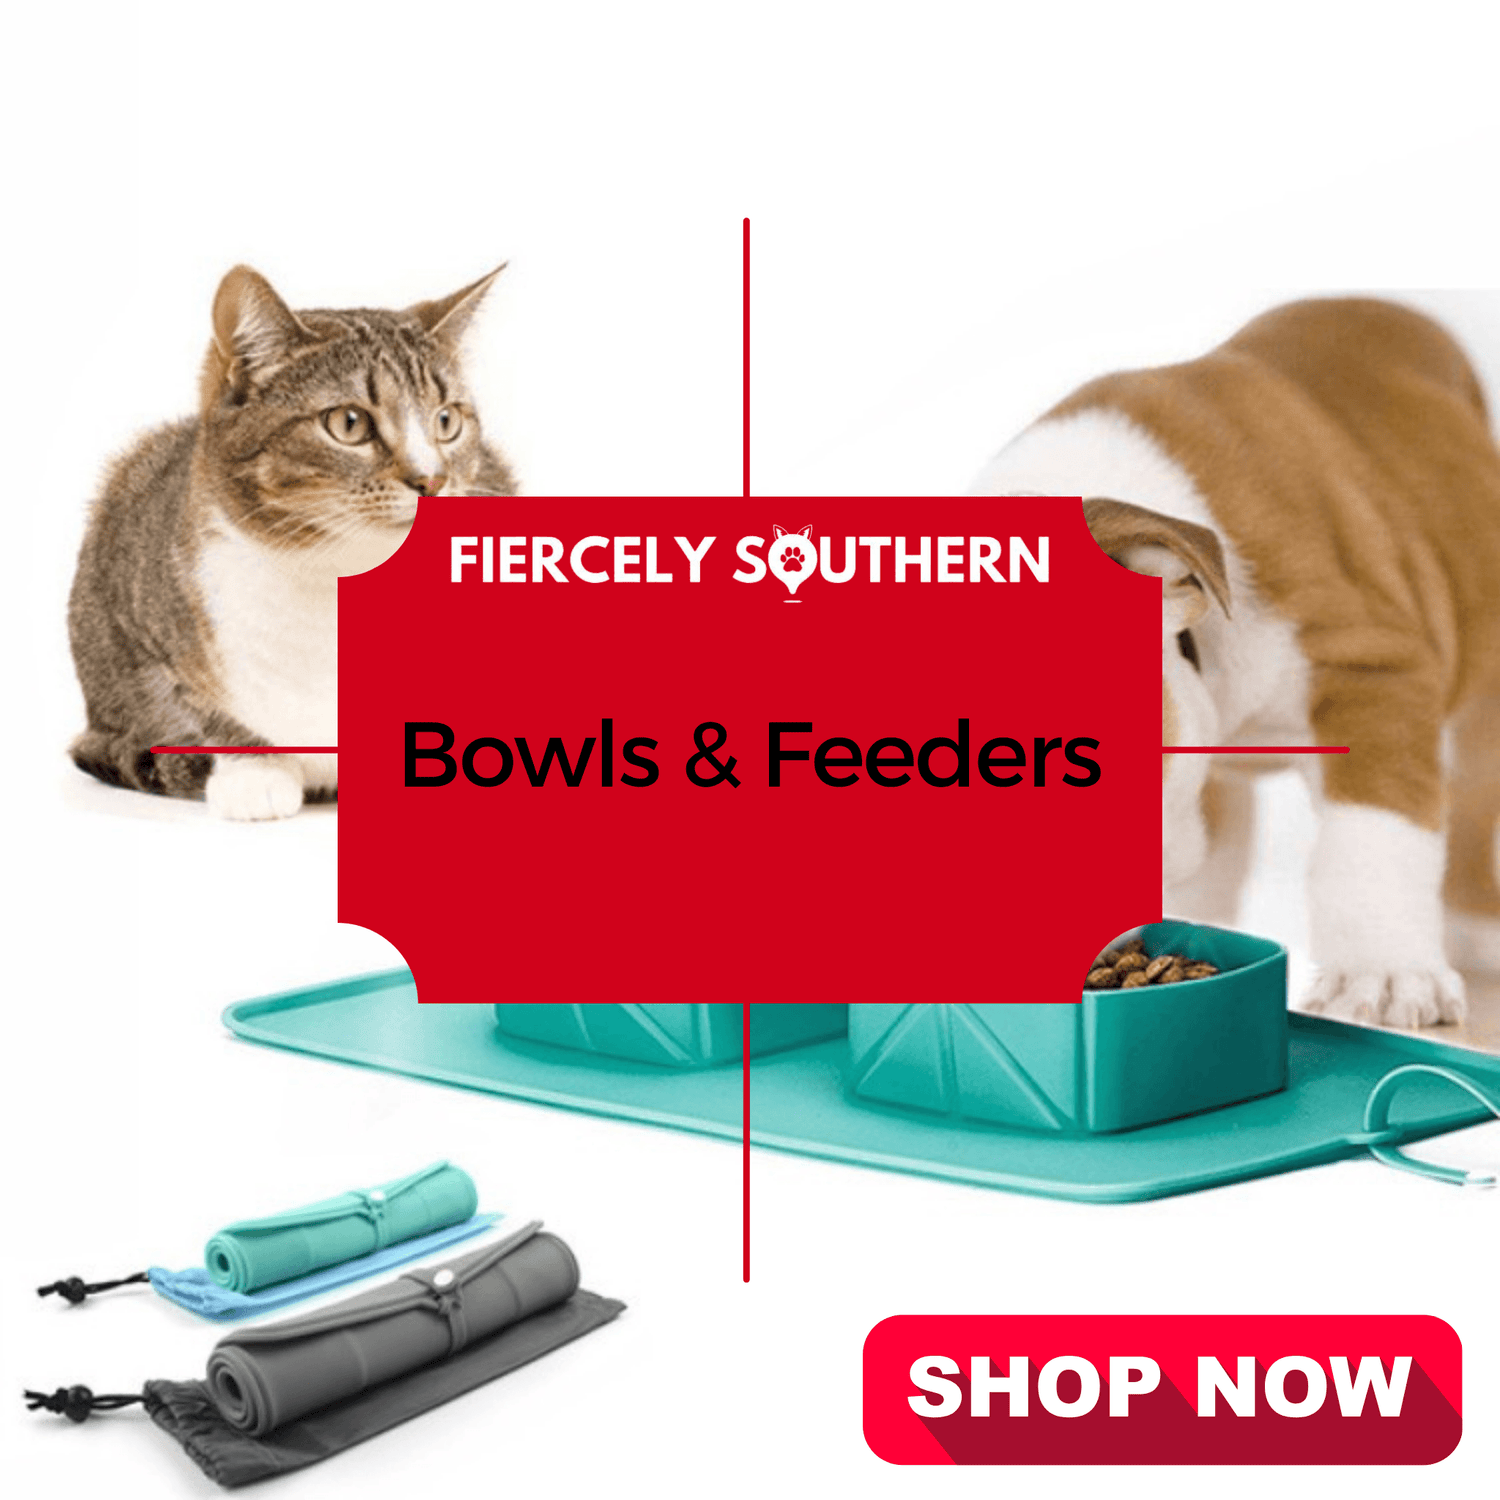 Bowls & Feeders - Fiercely Southern